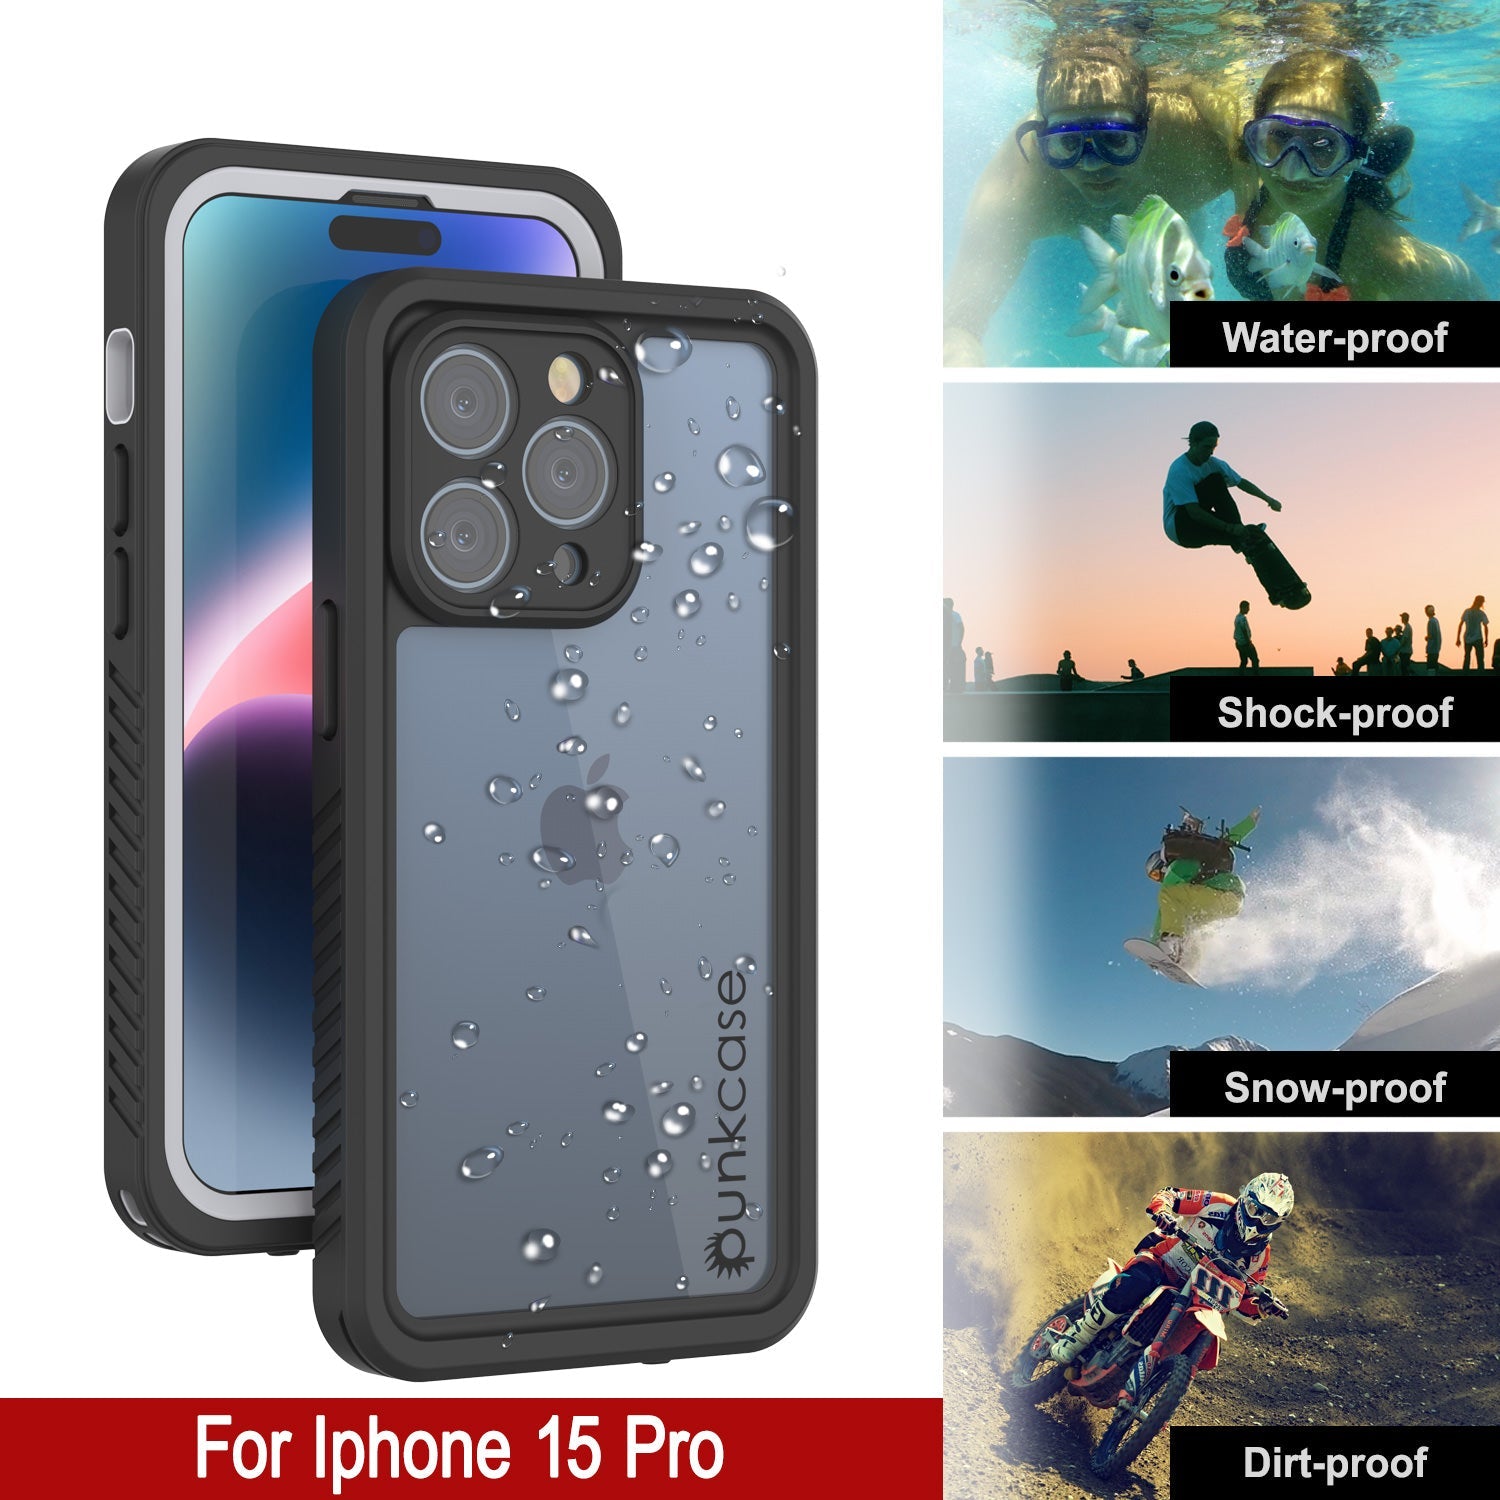 iPhone 15 Pro Waterproof Case, Punkcase [Extreme Series] Armor Cover W/ Built In Screen Protector [White]